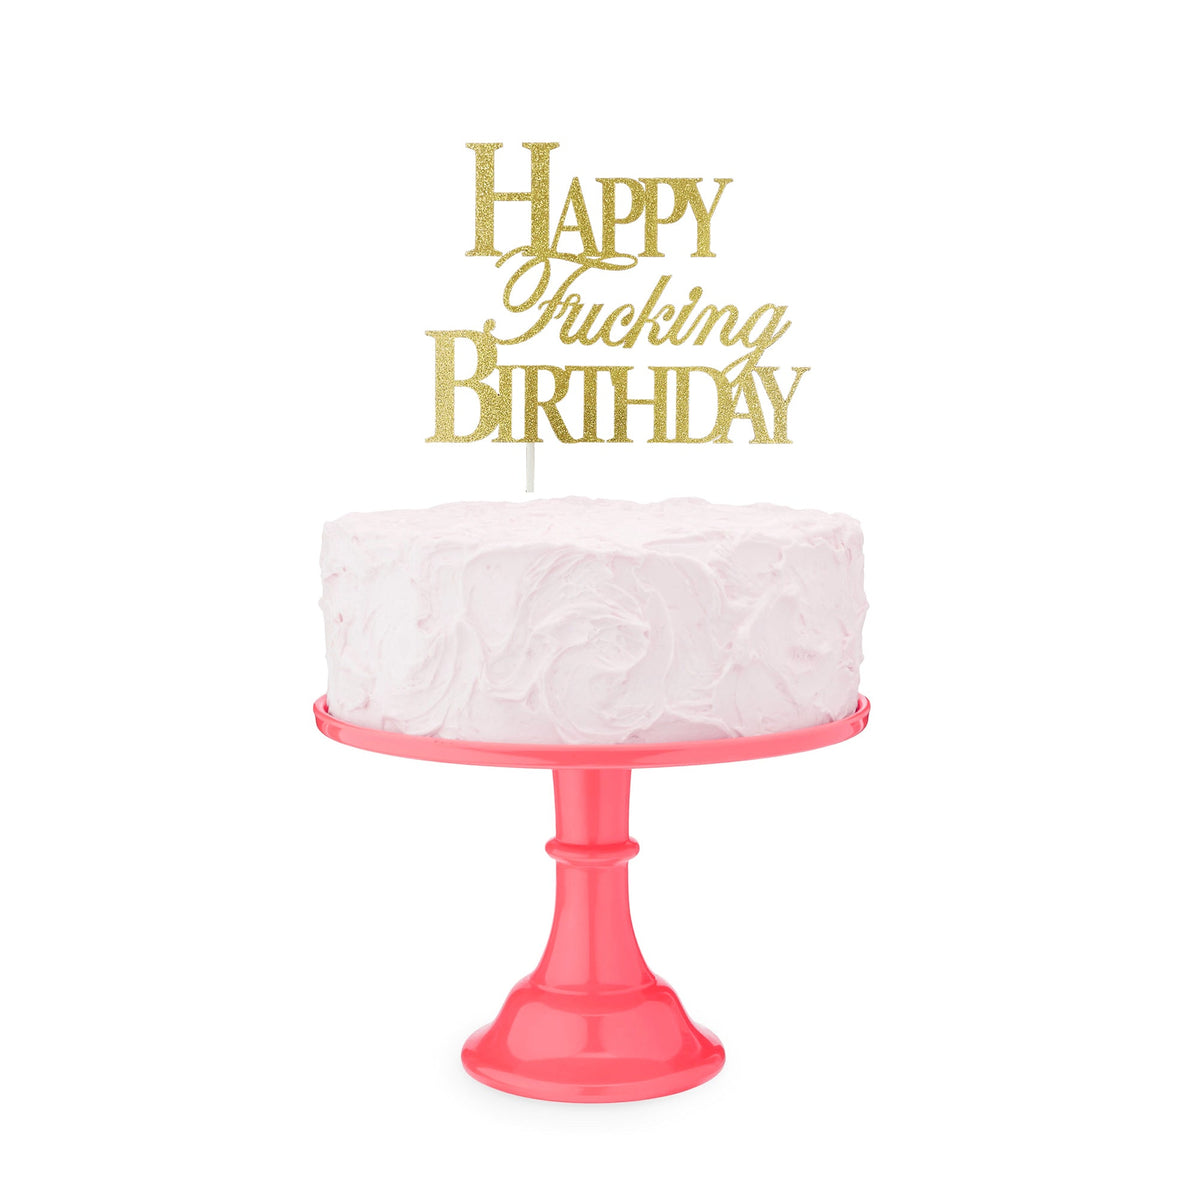 Little Genie Productions General Birthday Happy Fucking Birthday Cake Topper, 1 Count